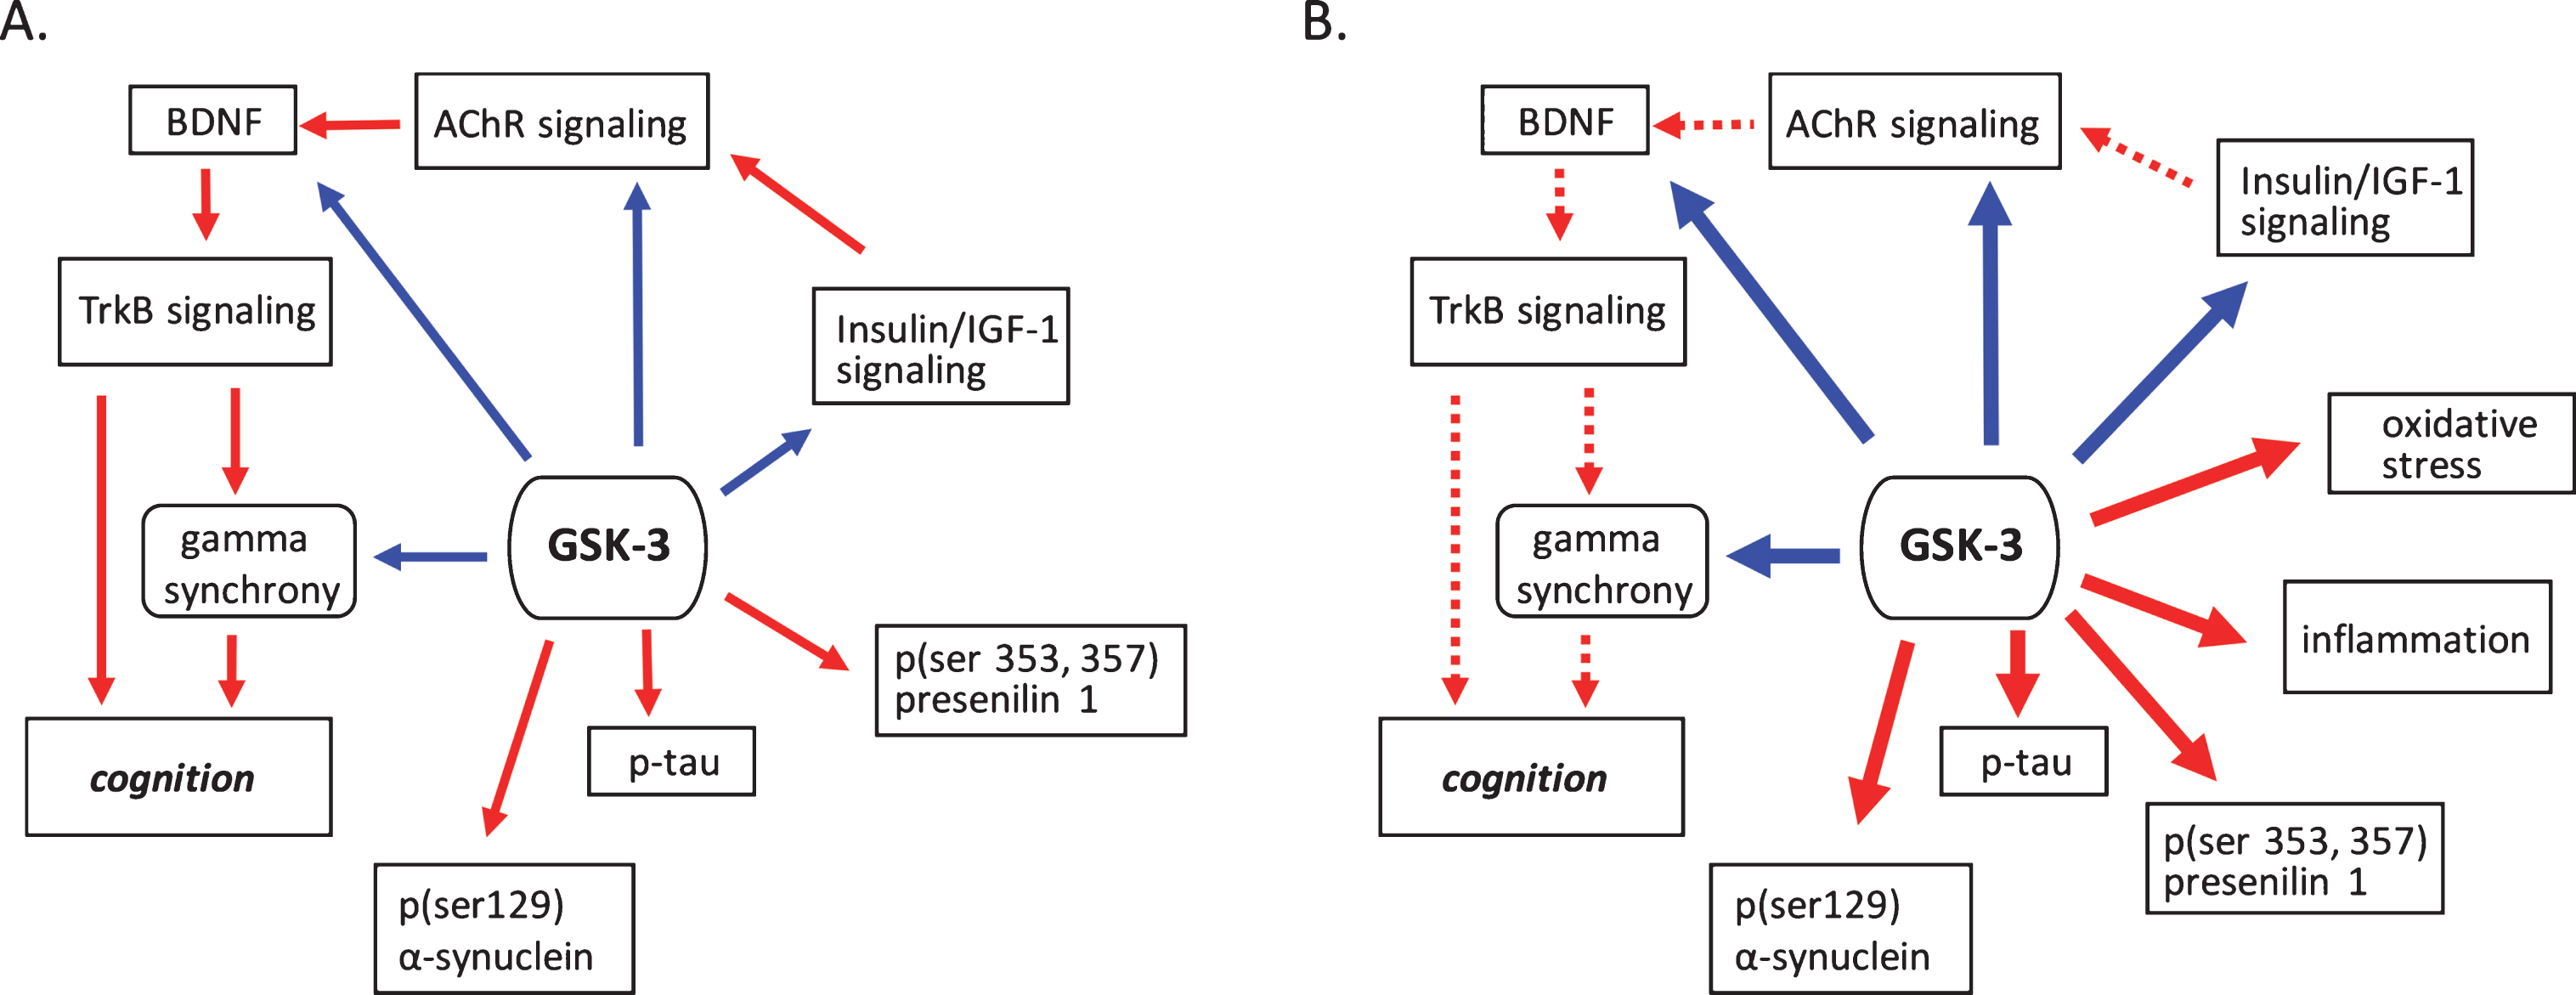 GSK-3 regulates processes implicated in neurodegenerative disease. A) Under normal conditions GSK-3 is known to suppress processes that positivetly regulate cognition such as cholinergic, BDNF, and insulin signaling. GSK-3 also is involved in the suppression of gamma frequency oscillations. The phosphorylation of tau, α-synuclein and presenilin are also mediated by GSK-3. B) Under pathological conditions GSK-3 activity is upregulated, increasing its negative influence on cholinergic, BDNF, and insulin signaling, and at the same time promoting phosphorylation events critical to the development of proteinopathies. Increased GSK-3 activity also induces oxidative stress and the onset of inflammatory processes. Positive regulation (red arrows) and negative regulation (blue arrows) of each pathway and/or process are shown. Changes in the overall activity of these pathways compared to normal conditions are represented by the solid arrows (increased activation) and dotted arrows (decreased activation). AChR, acetylcholine receptor; BDNF, brain-derived neurotrophic factor; GSK-3β, glycogen synthase kinase-3β; IGF-1, insulin growth factor 1; TrkB, tropomyosin receptor kinase B; TrkB.T1, truncated tropomyosin receptor kinase.